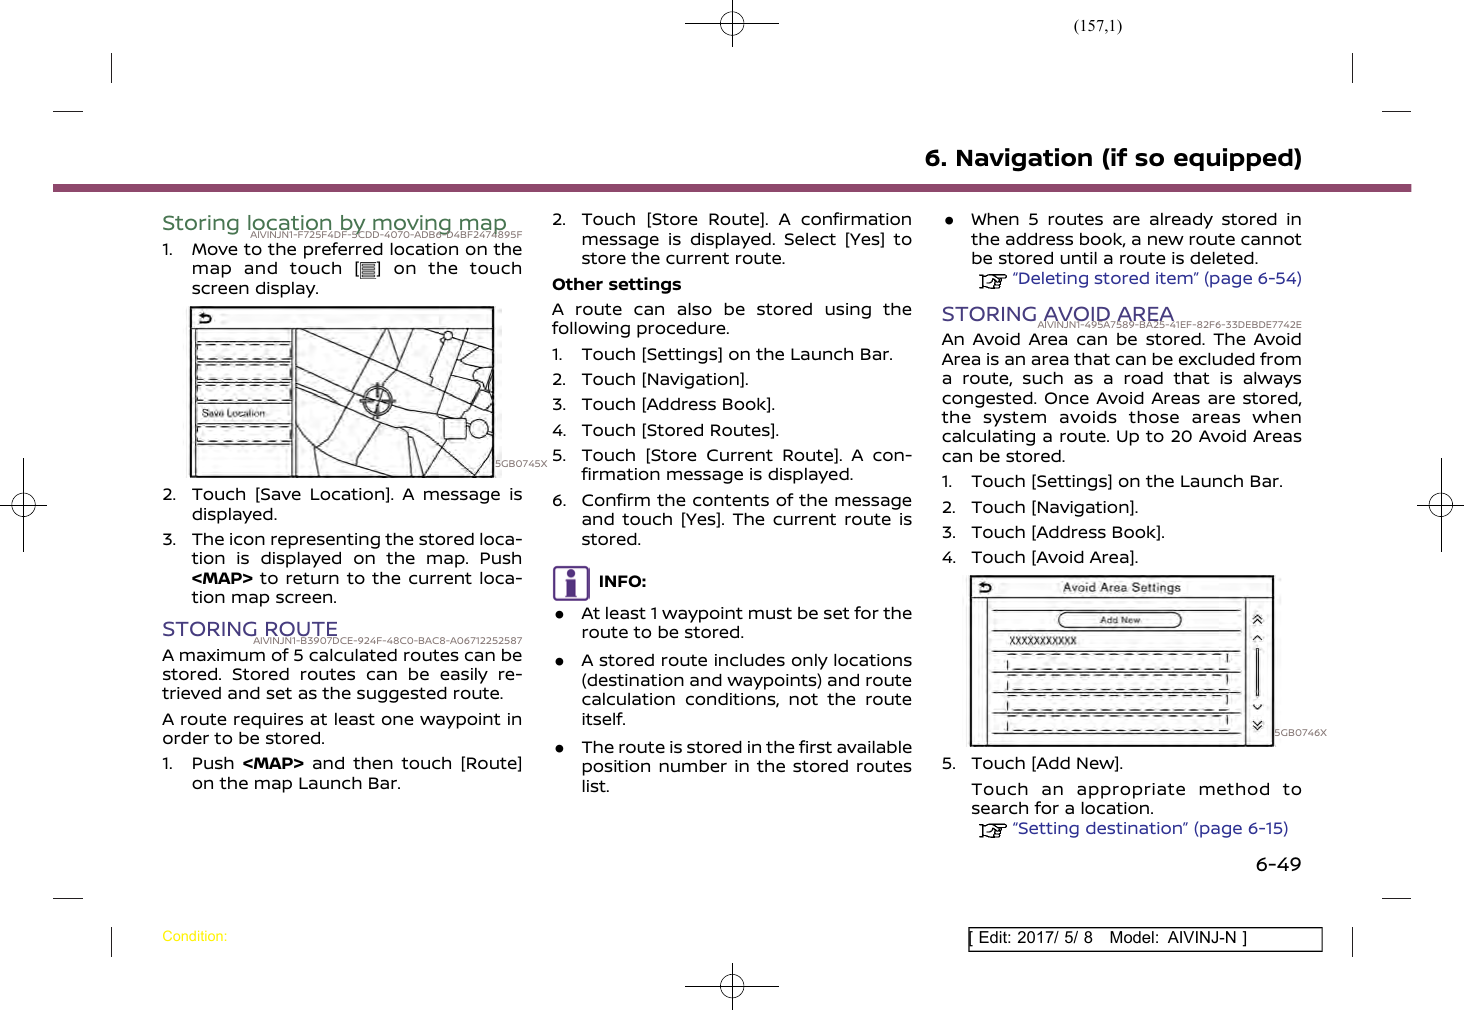 Page 157 of Robert Bosch Car Multimedia AIVICMFB0 Navigation System with Bluetooth and WLAN User Manual